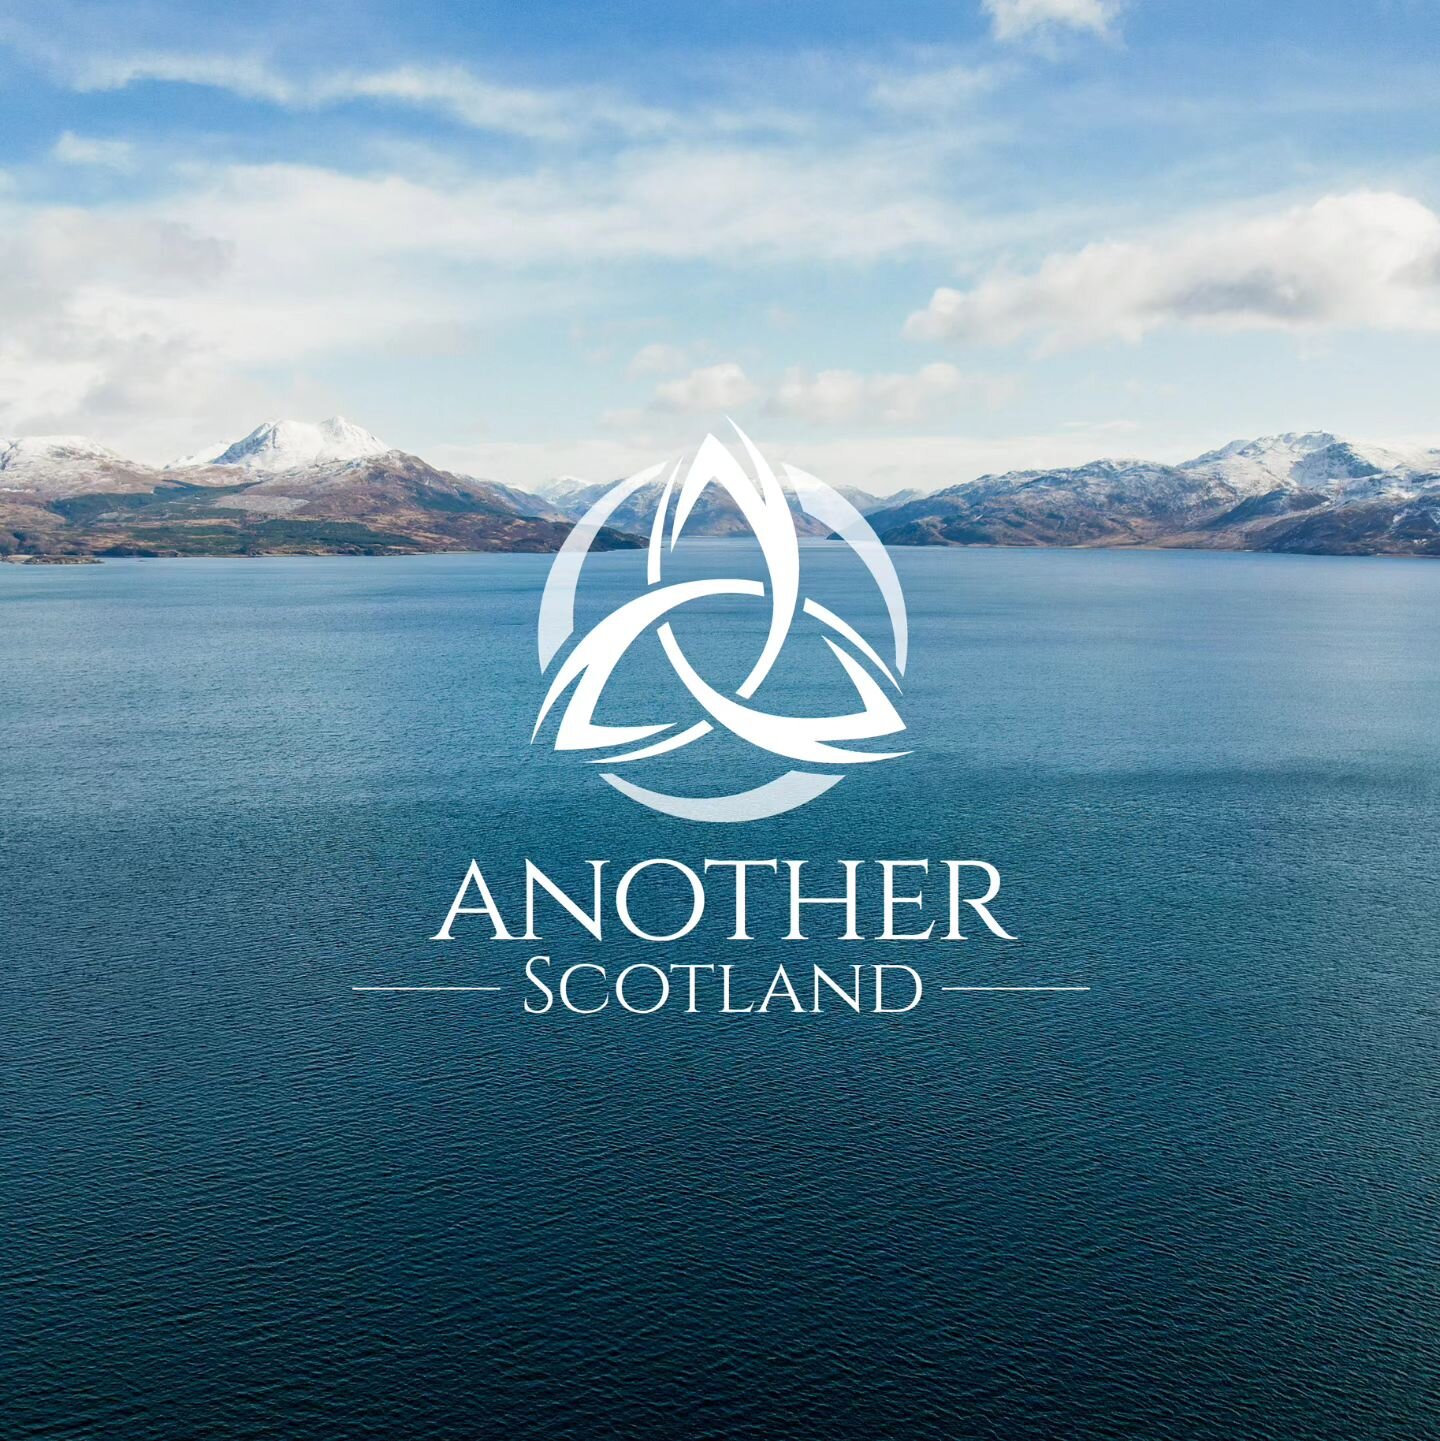 Plan your personal journey with Another Scotland.

From bespoke itineraries to expert walking tours and a dedicated planning service, we offer specialist discoveries of a country like no other. 

Now taking 2024 bookings!

#scotlandtours #scotlandgui